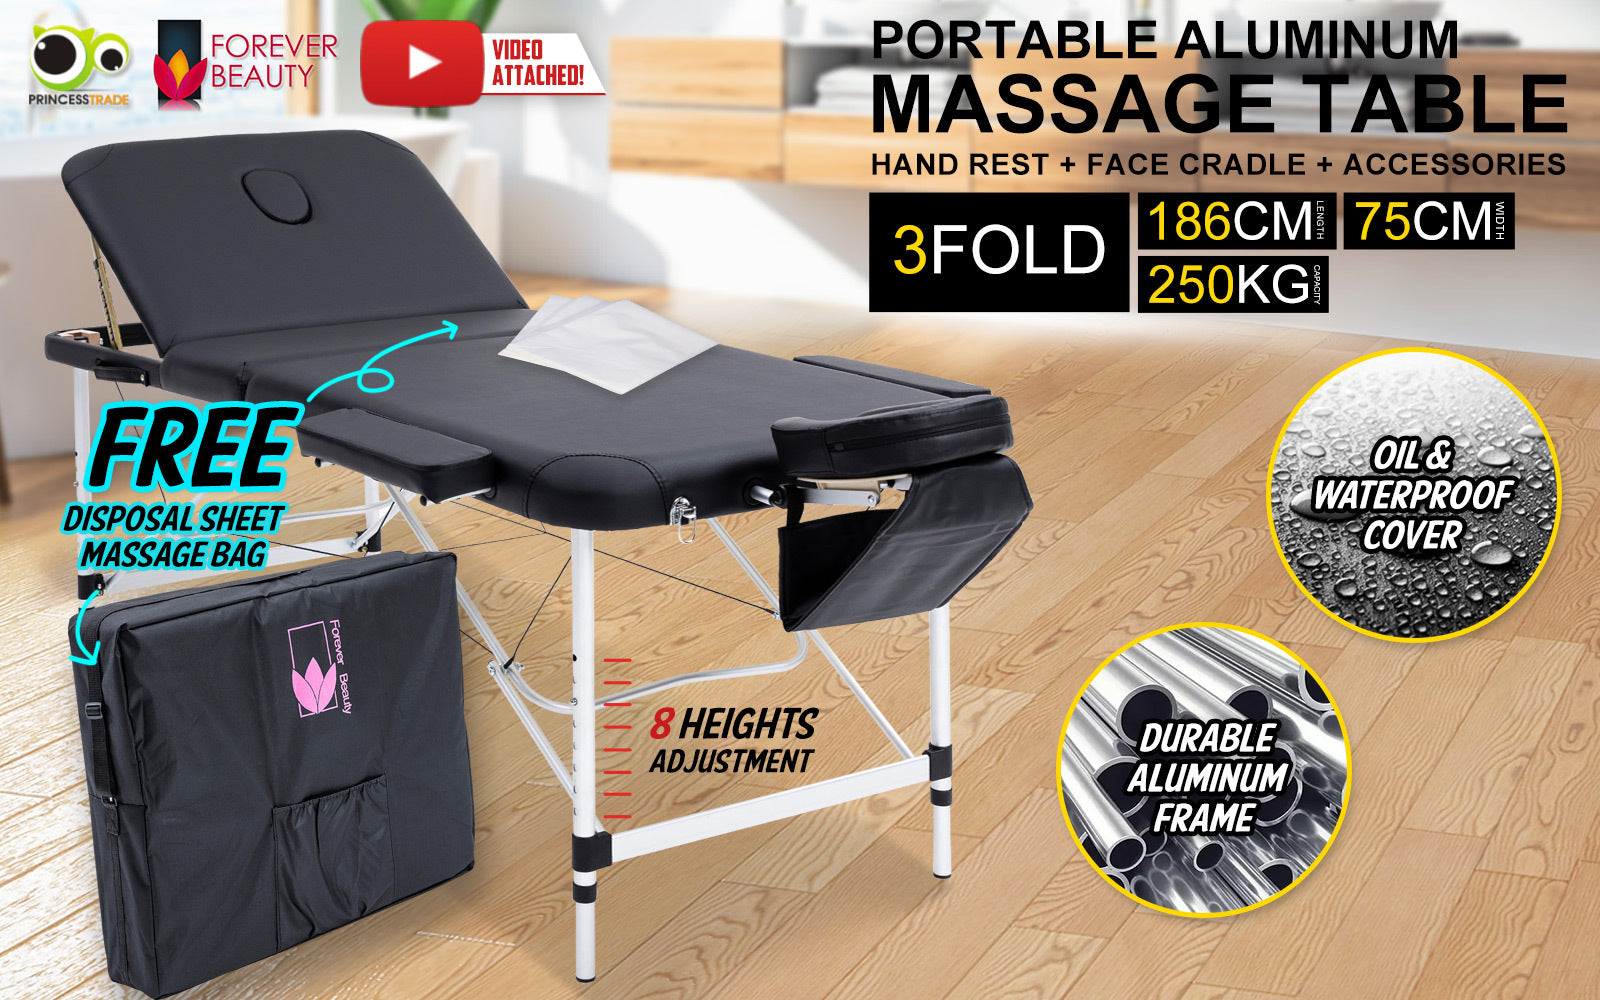 Forever Beauty Black Portable Beauty Massage Table Bed Therapy Waxing 3 Fold 75cm Aluminium - SILBERSHELL